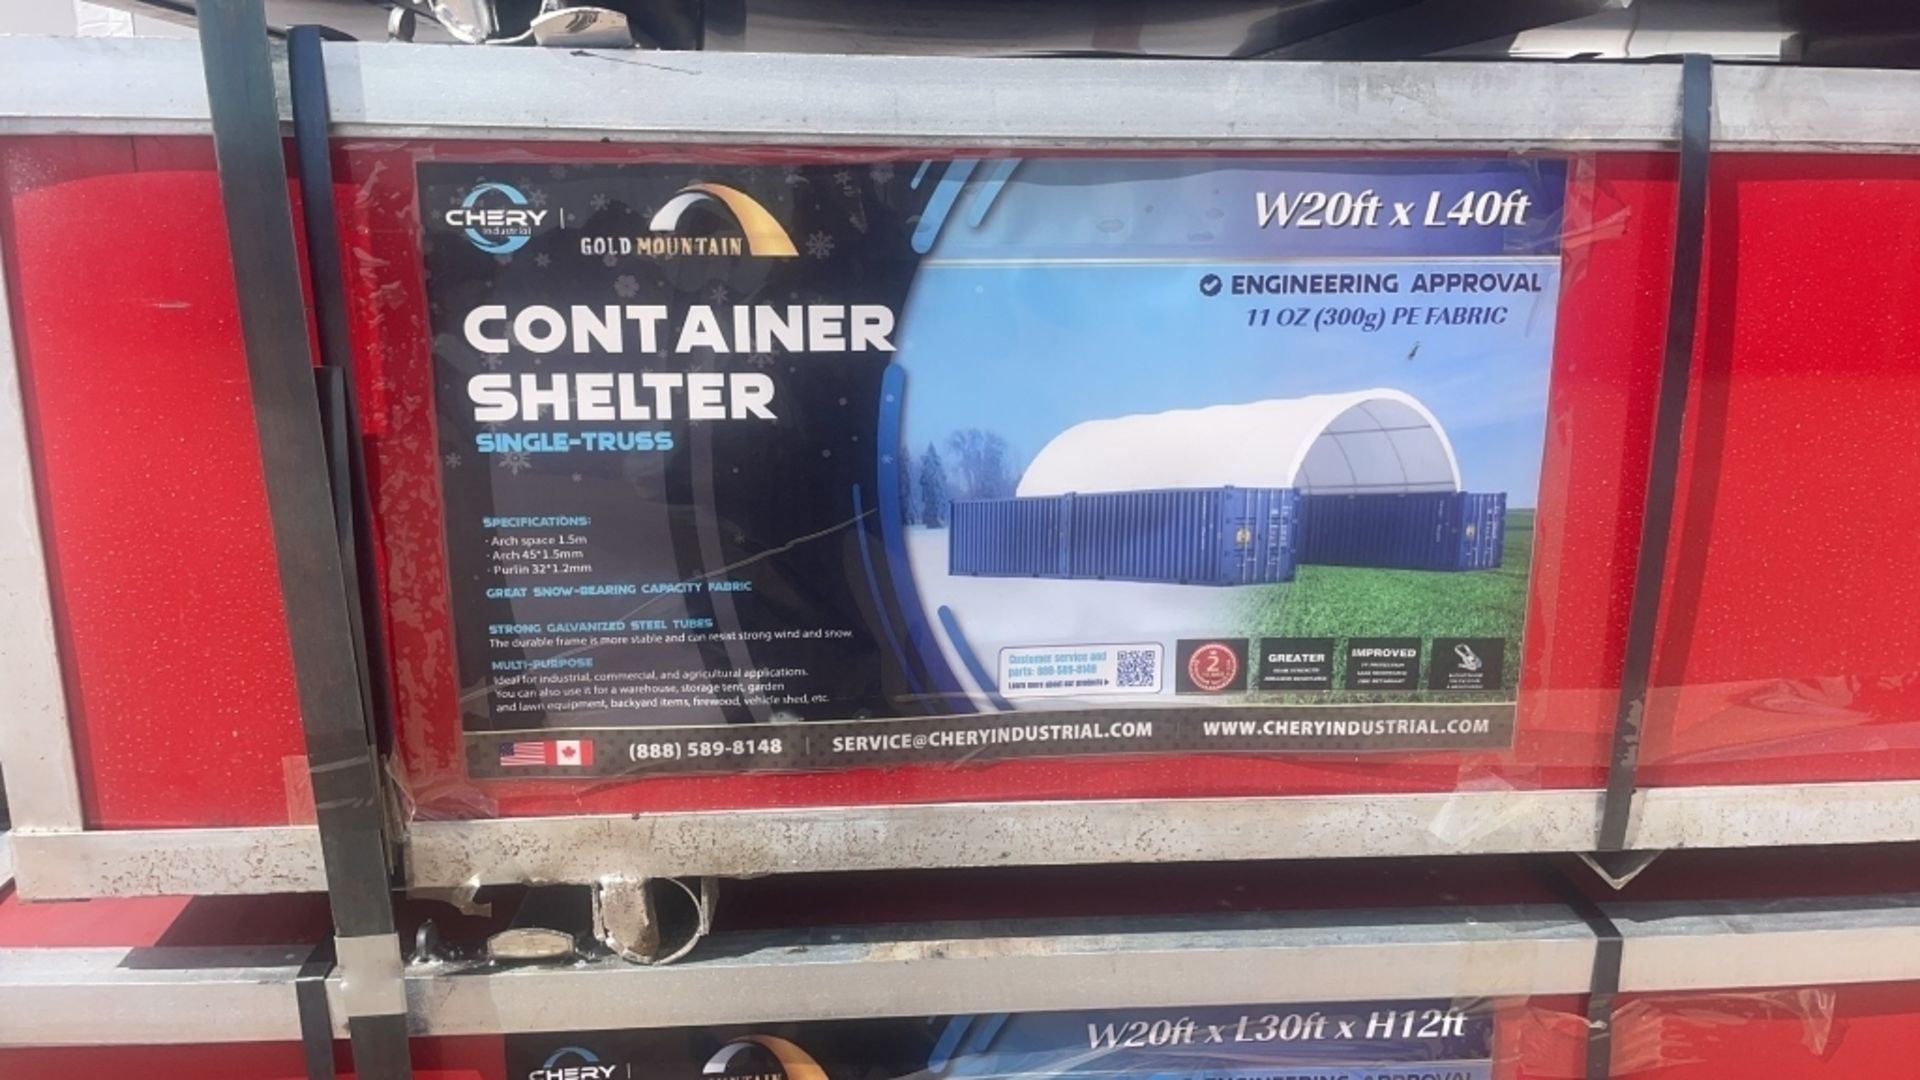 Unused 20x40 Dome Container Shelter in broken box - Image 3 of 8